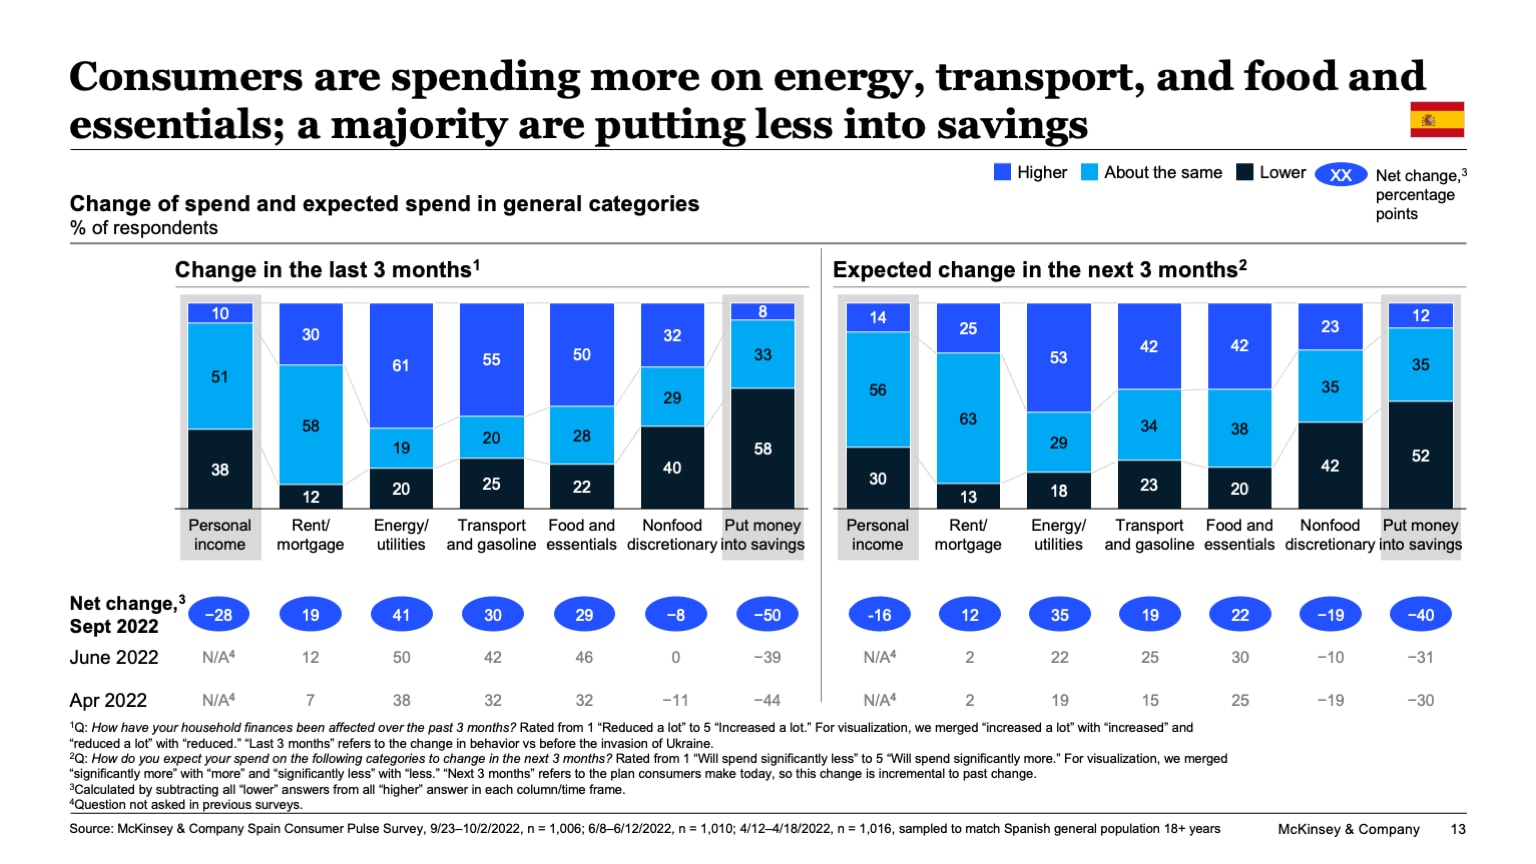 Consumers are spending more on energy, transport, and food and essentials; a majority are putting less into savings